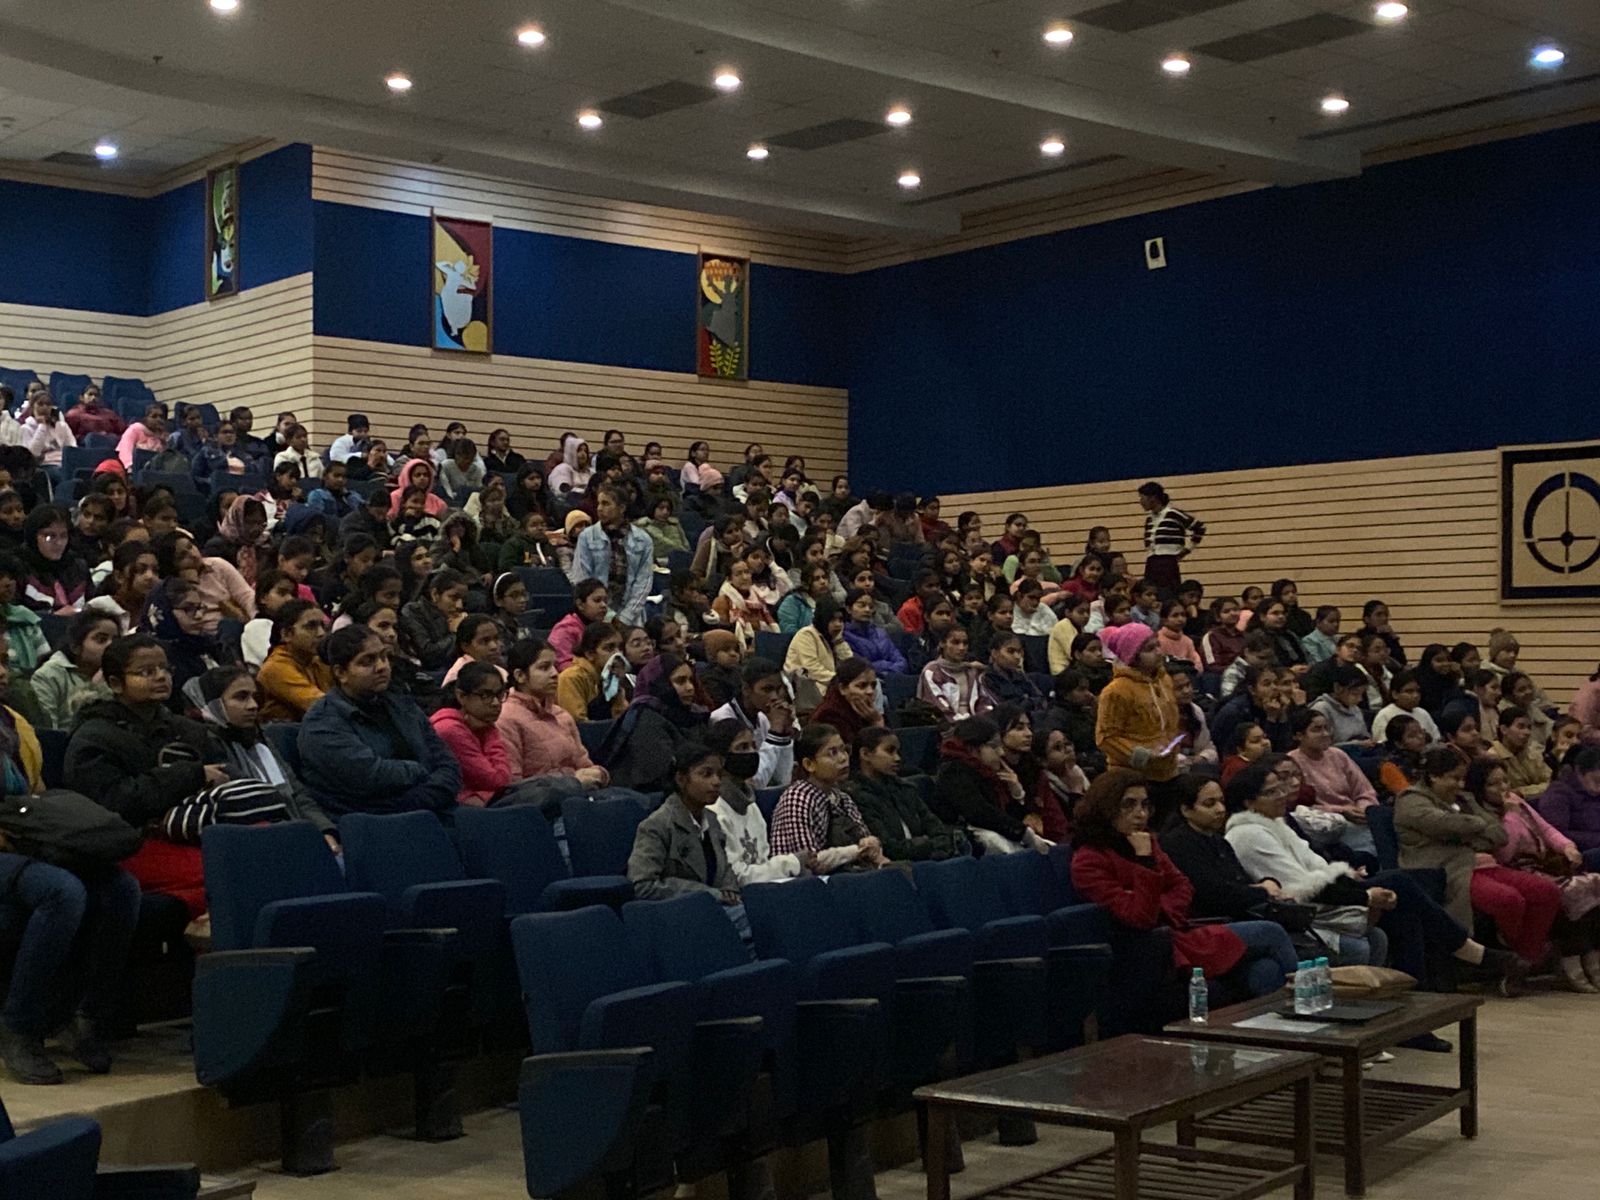 Asifa International Animation Day celebrations at various Campuses in Chandigarh